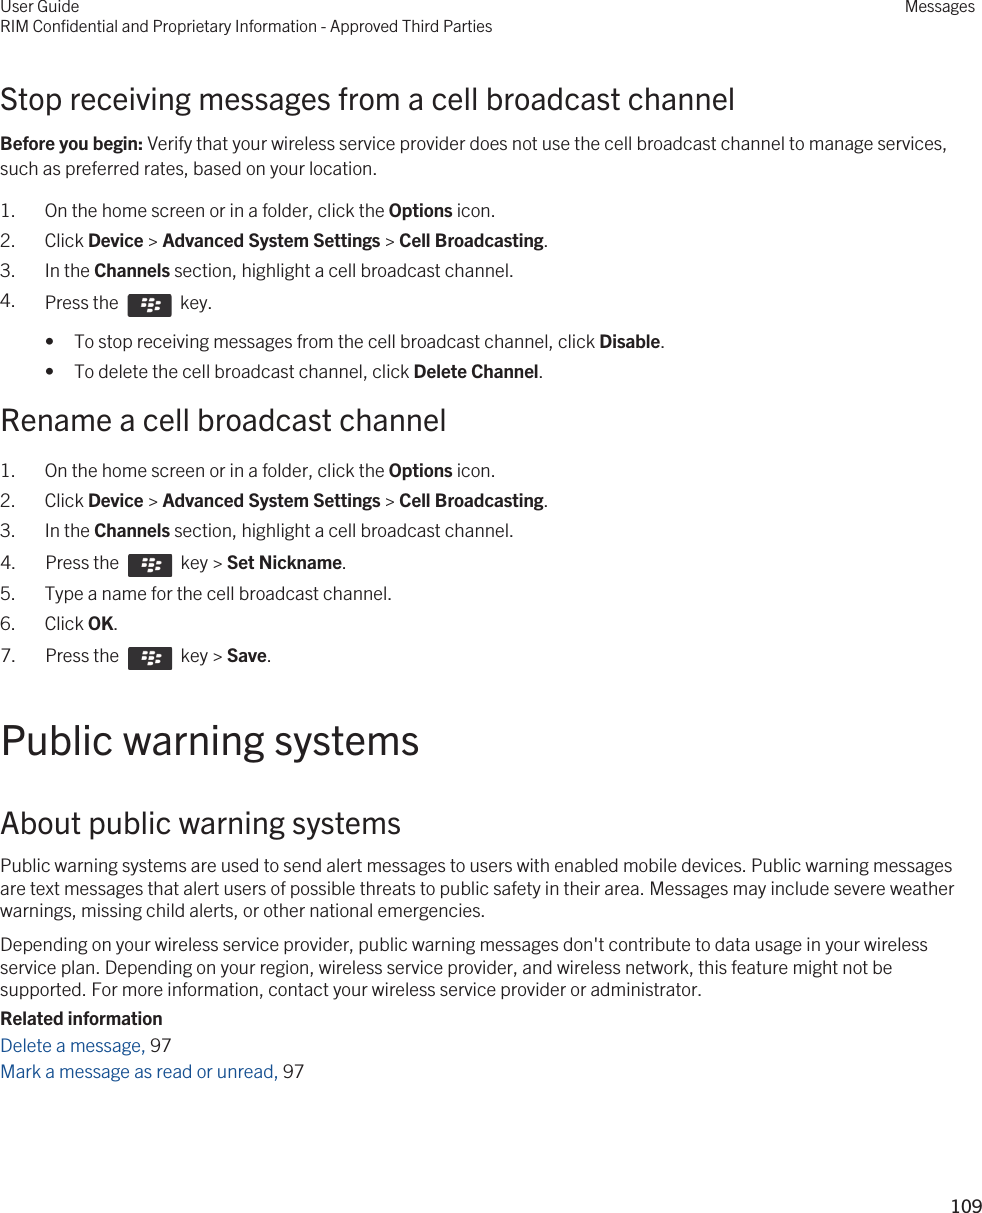 Stop receiving messages from a cell broadcast channelBefore you begin: Verify that your wireless service provider does not use the cell broadcast channel to manage services, such as preferred rates, based on your location.1. On the home screen or in a folder, click the Options icon.2. Click Device &gt; Advanced System Settings &gt; Cell Broadcasting.3. In the Channels section, highlight a cell broadcast channel.4. Press the    key. • To stop receiving messages from the cell broadcast channel, click Disable.• To delete the cell broadcast channel, click Delete Channel.Rename a cell broadcast channel1. On the home screen or in a folder, click the Options icon.2. Click Device &gt; Advanced System Settings &gt; Cell Broadcasting.3. In the Channels section, highlight a cell broadcast channel.4.  Press the    key &gt; Set Nickname.5. Type a name for the cell broadcast channel.6. Click OK.7.  Press the    key &gt; Save. Public warning systemsAbout public warning systemsPublic warning systems are used to send alert messages to users with enabled mobile devices. Public warning messages are text messages that alert users of possible threats to public safety in their area. Messages may include severe weather warnings, missing child alerts, or other national emergencies.Depending on your wireless service provider, public warning messages don&apos;t contribute to data usage in your wireless service plan. Depending on your region, wireless service provider, and wireless network, this feature might not be supported. For more information, contact your wireless service provider or administrator.Related informationDelete a message, 97 Mark a message as read or unread, 97 User GuideRIM Confidential and Proprietary Information - Approved Third PartiesMessages109 